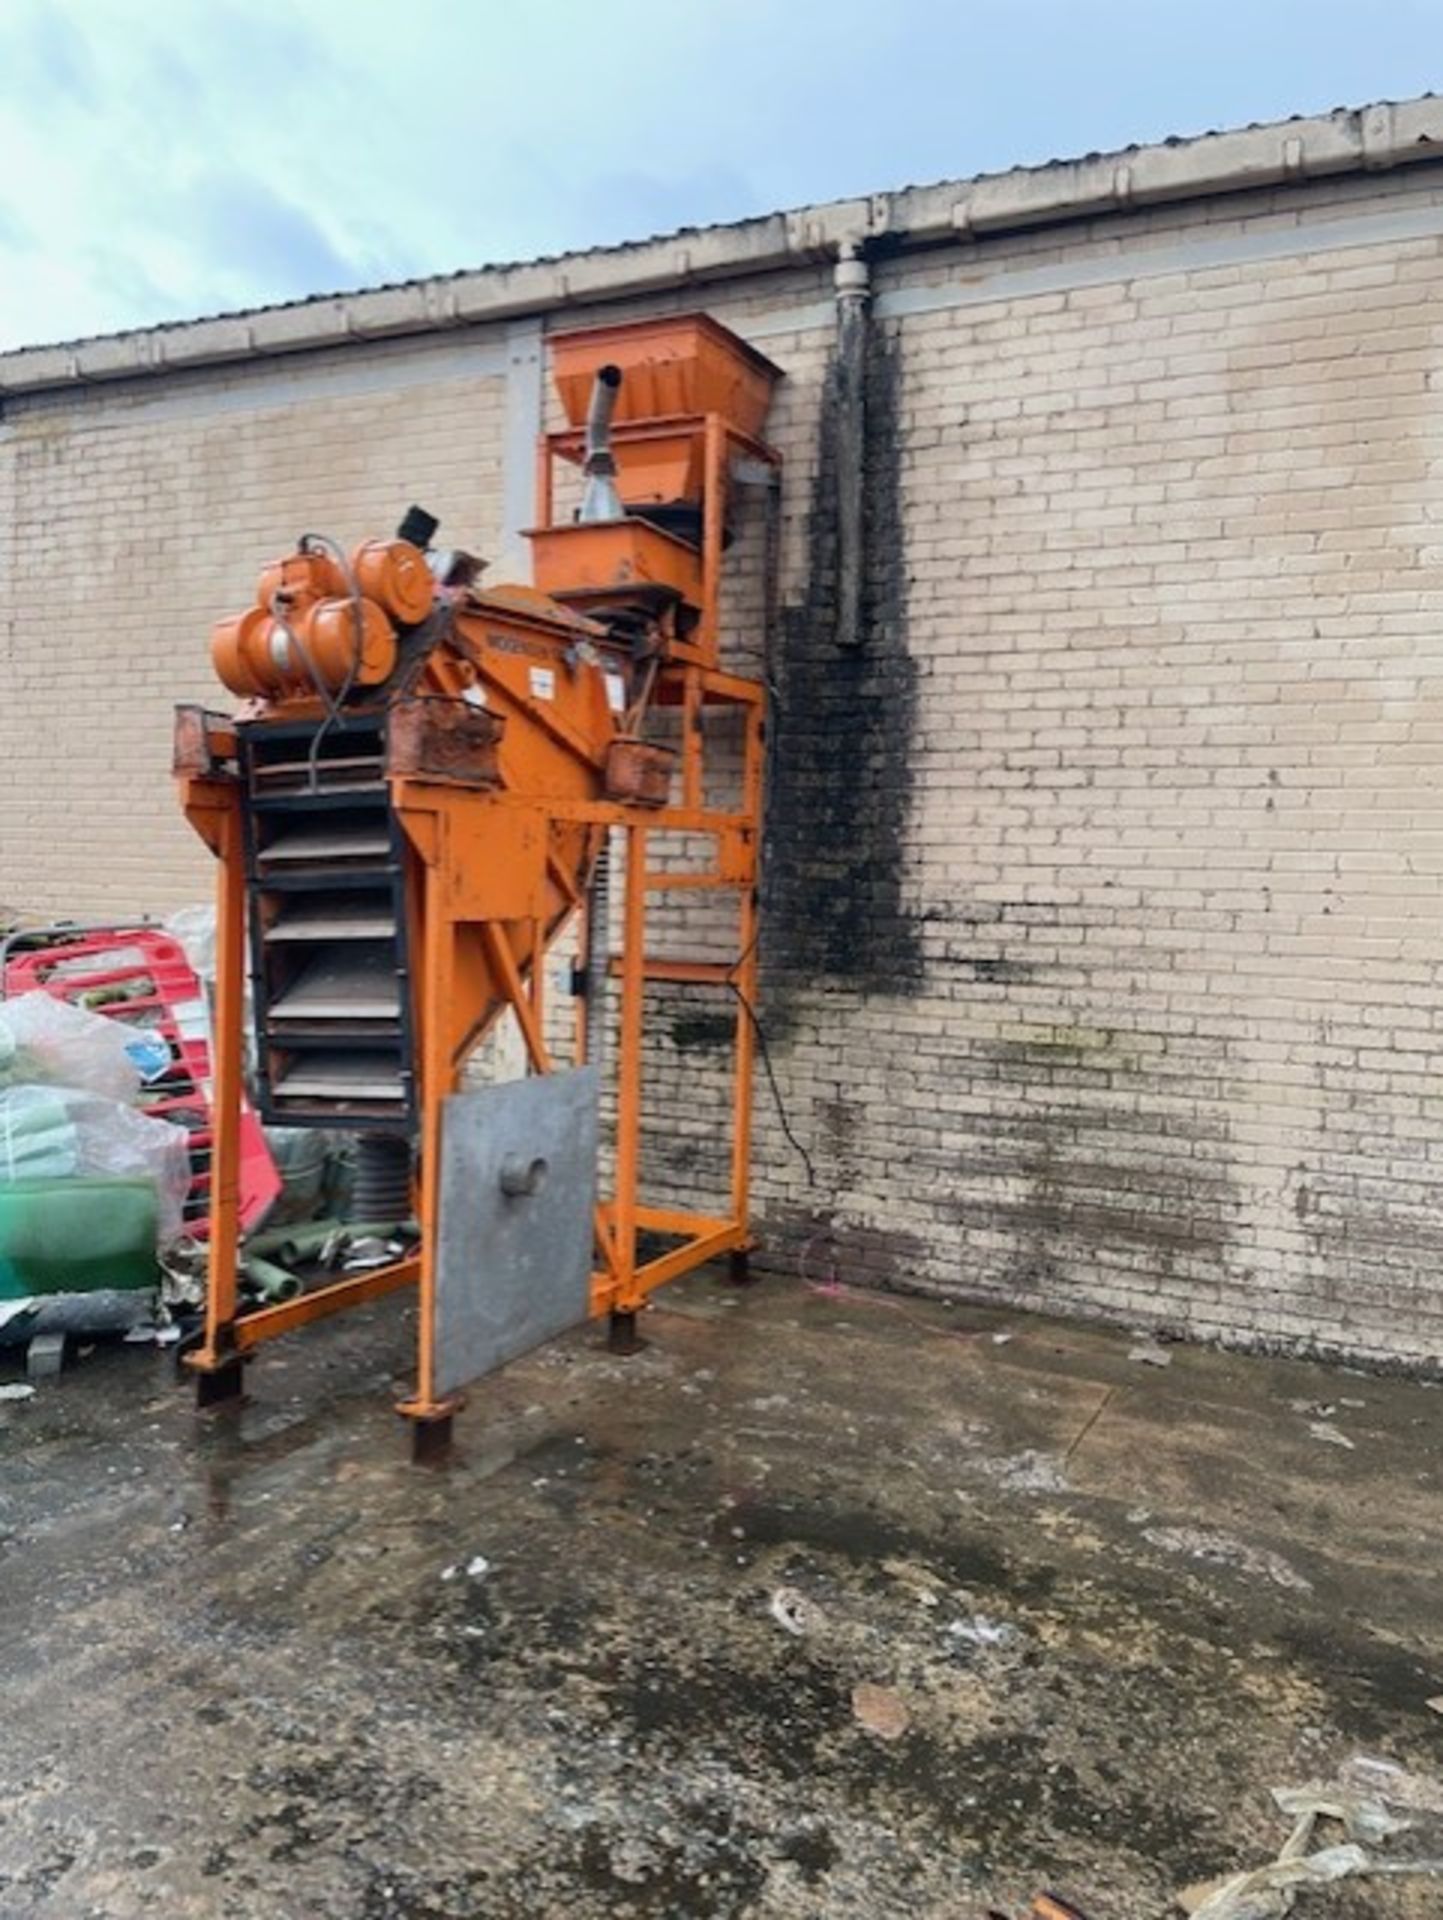 Crusher for crushing bricks 3 phase electric motors on it please note it hasnt got the  power to - Image 2 of 3